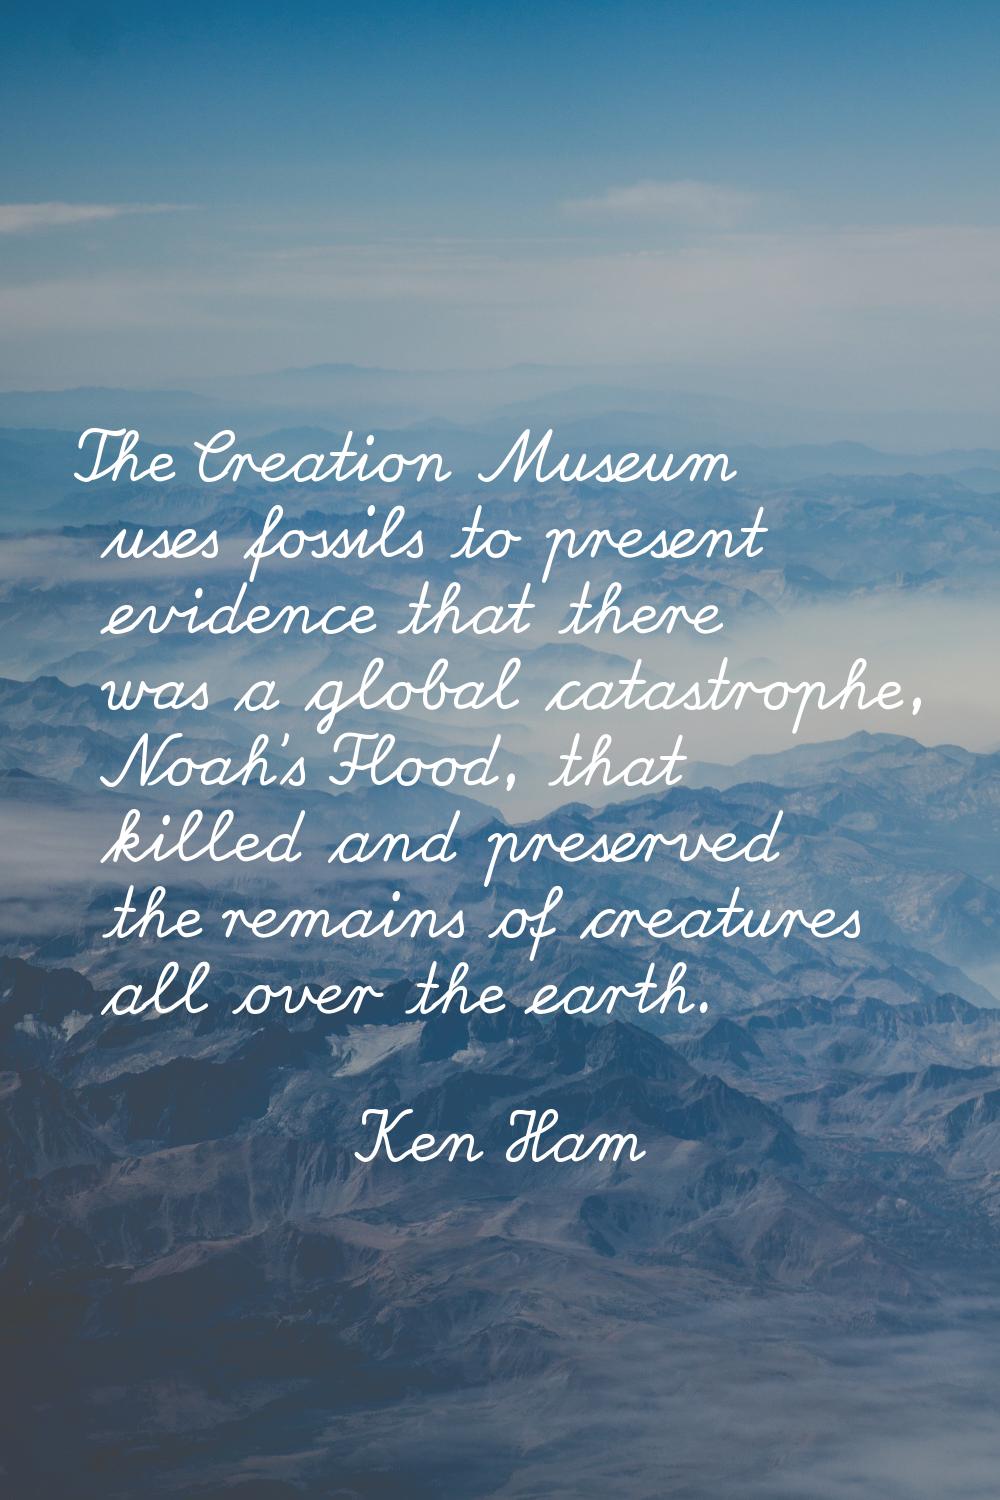 The Creation Museum uses fossils to present evidence that there was a global catastrophe, Noah's Fl